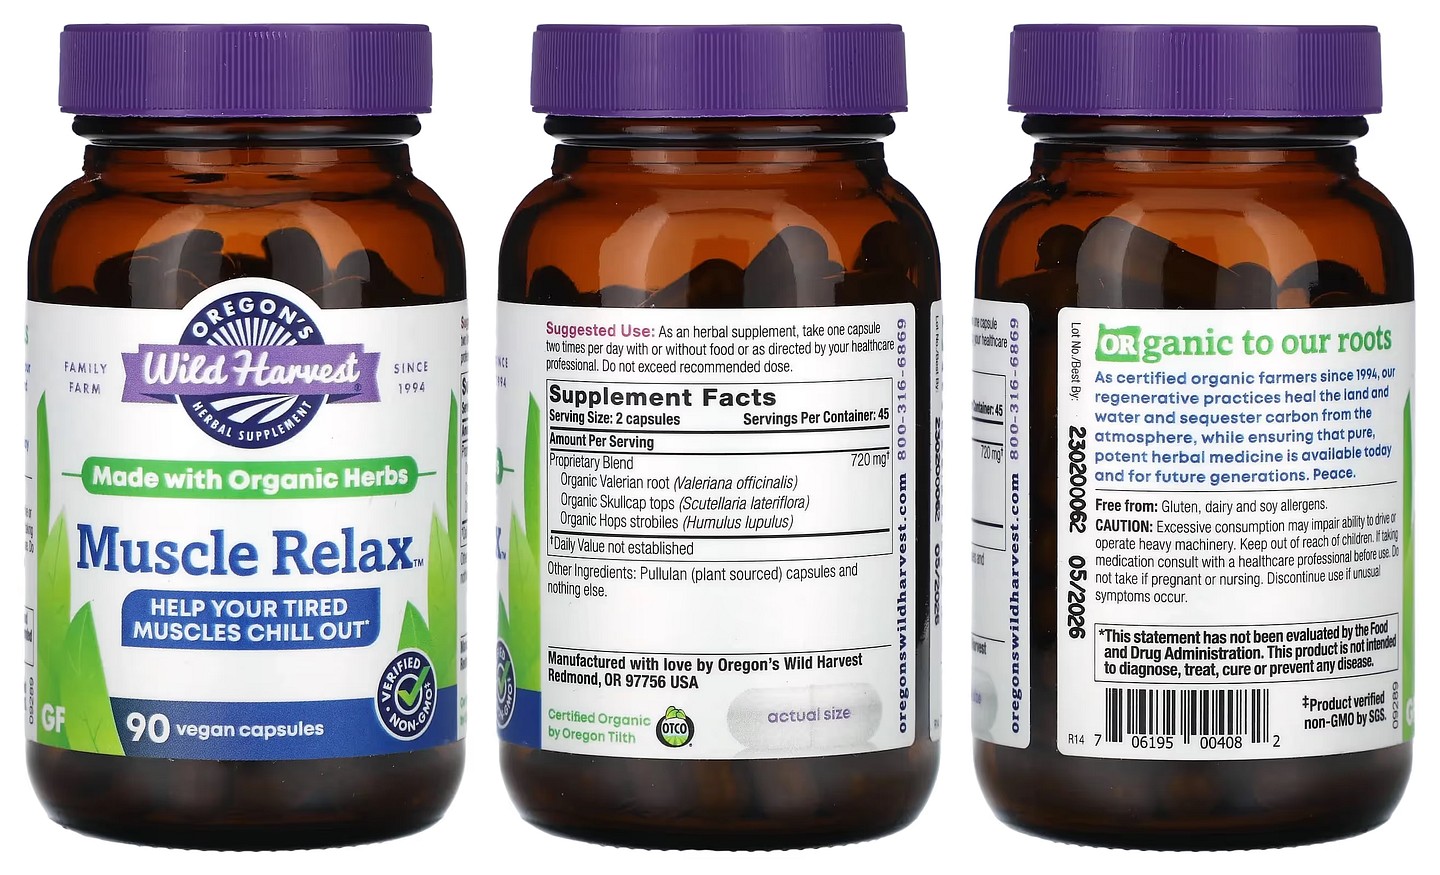 Oregon's Wild Harvest, Muscle Relax packaging